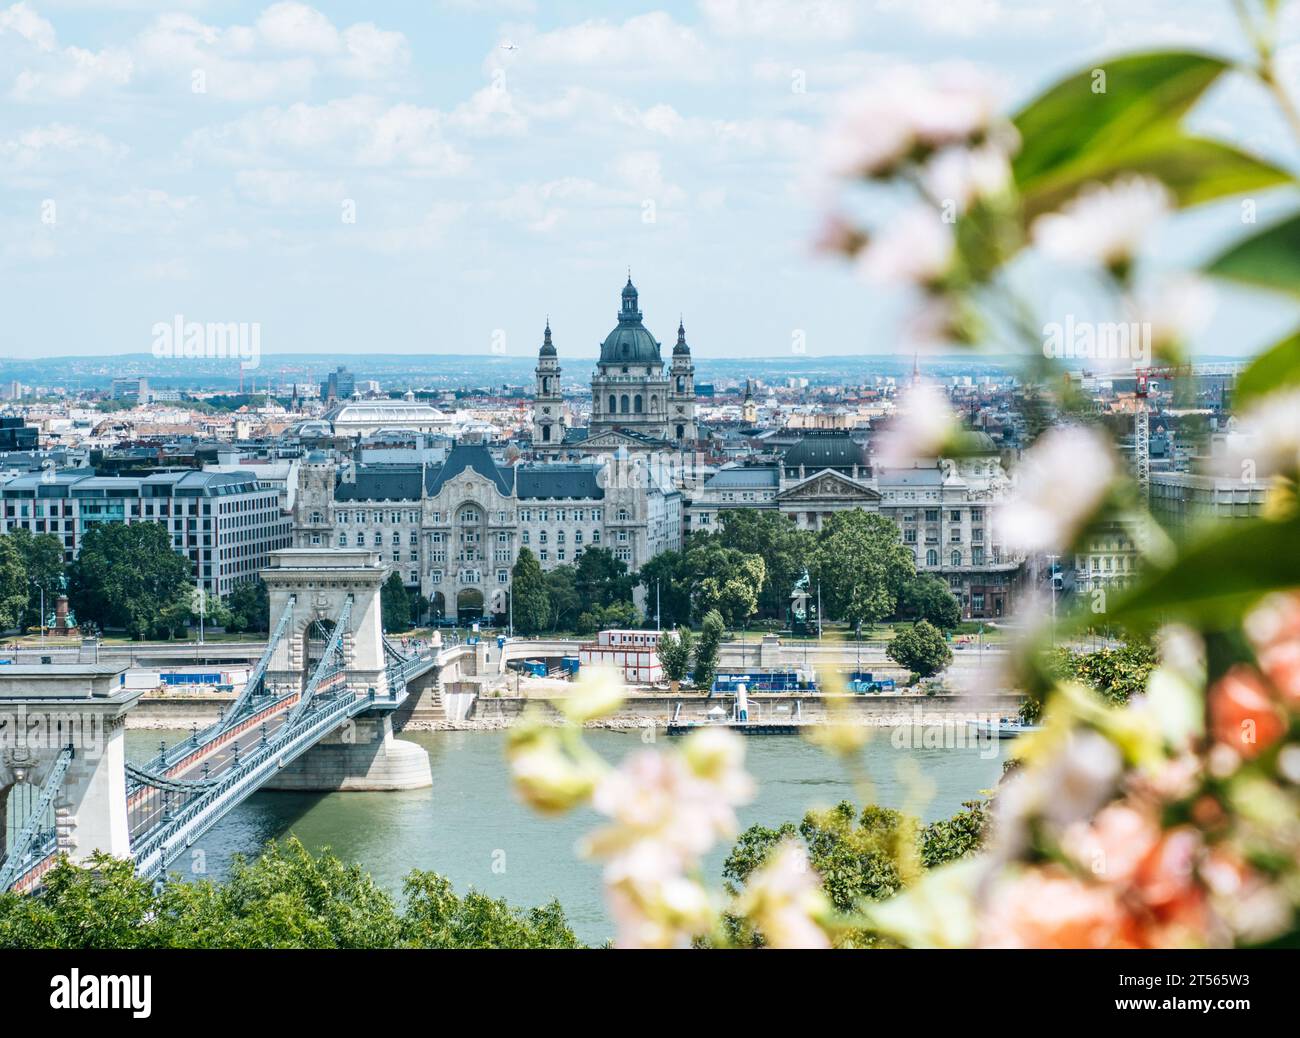 View of Budapest city and Danube river through flowers, Hungary Stock Photo